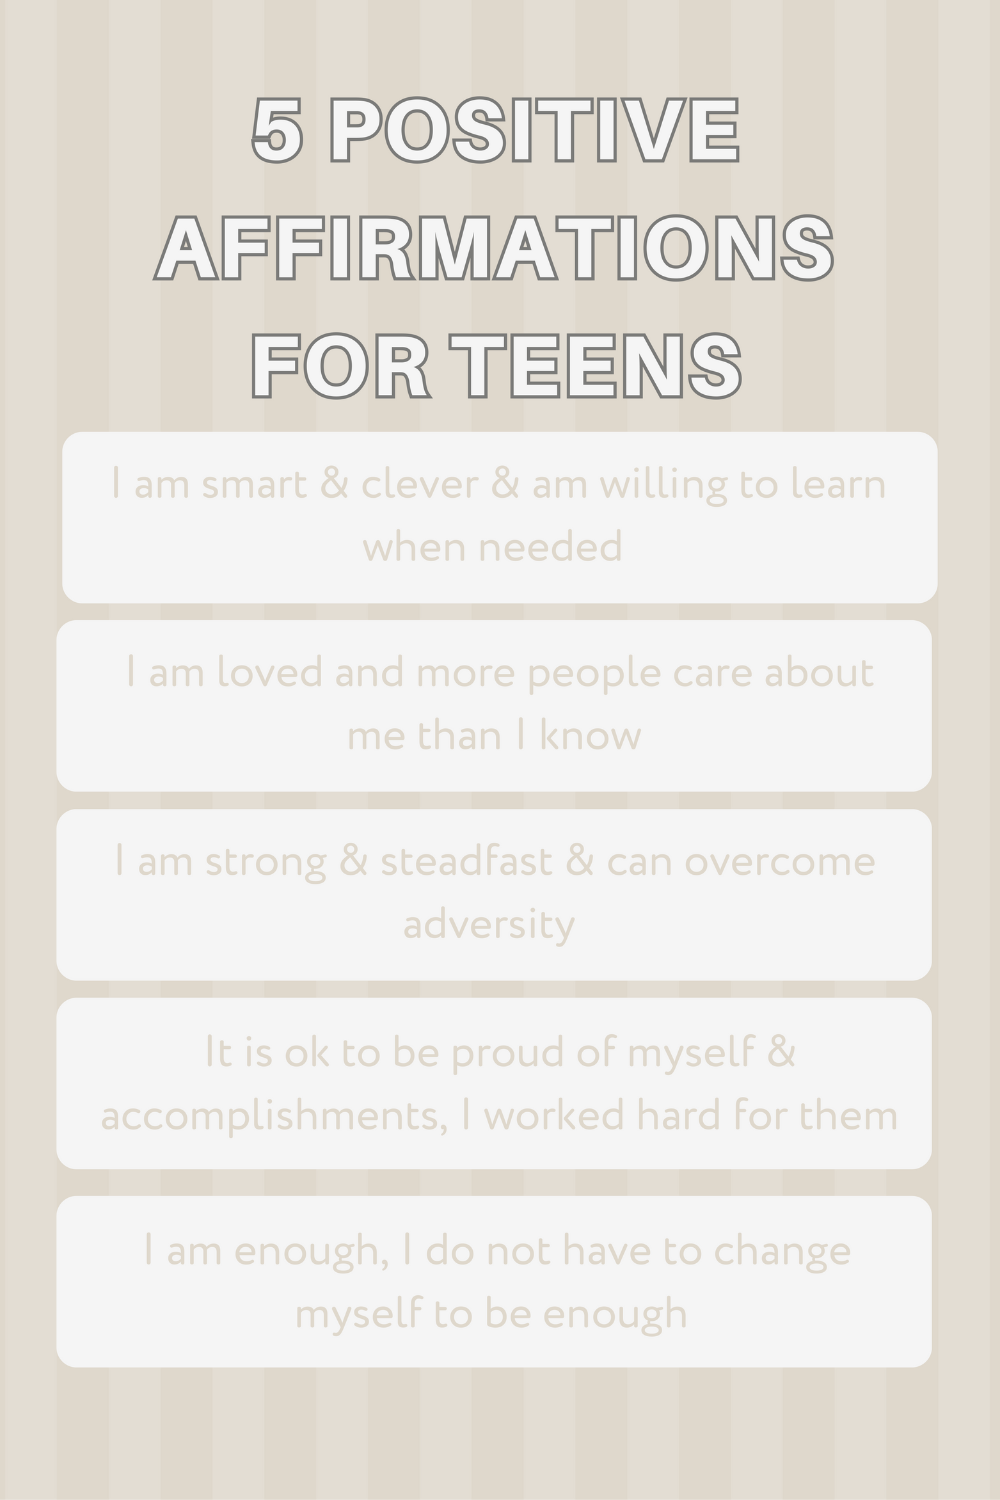 5 Positive Affirmations for Teens